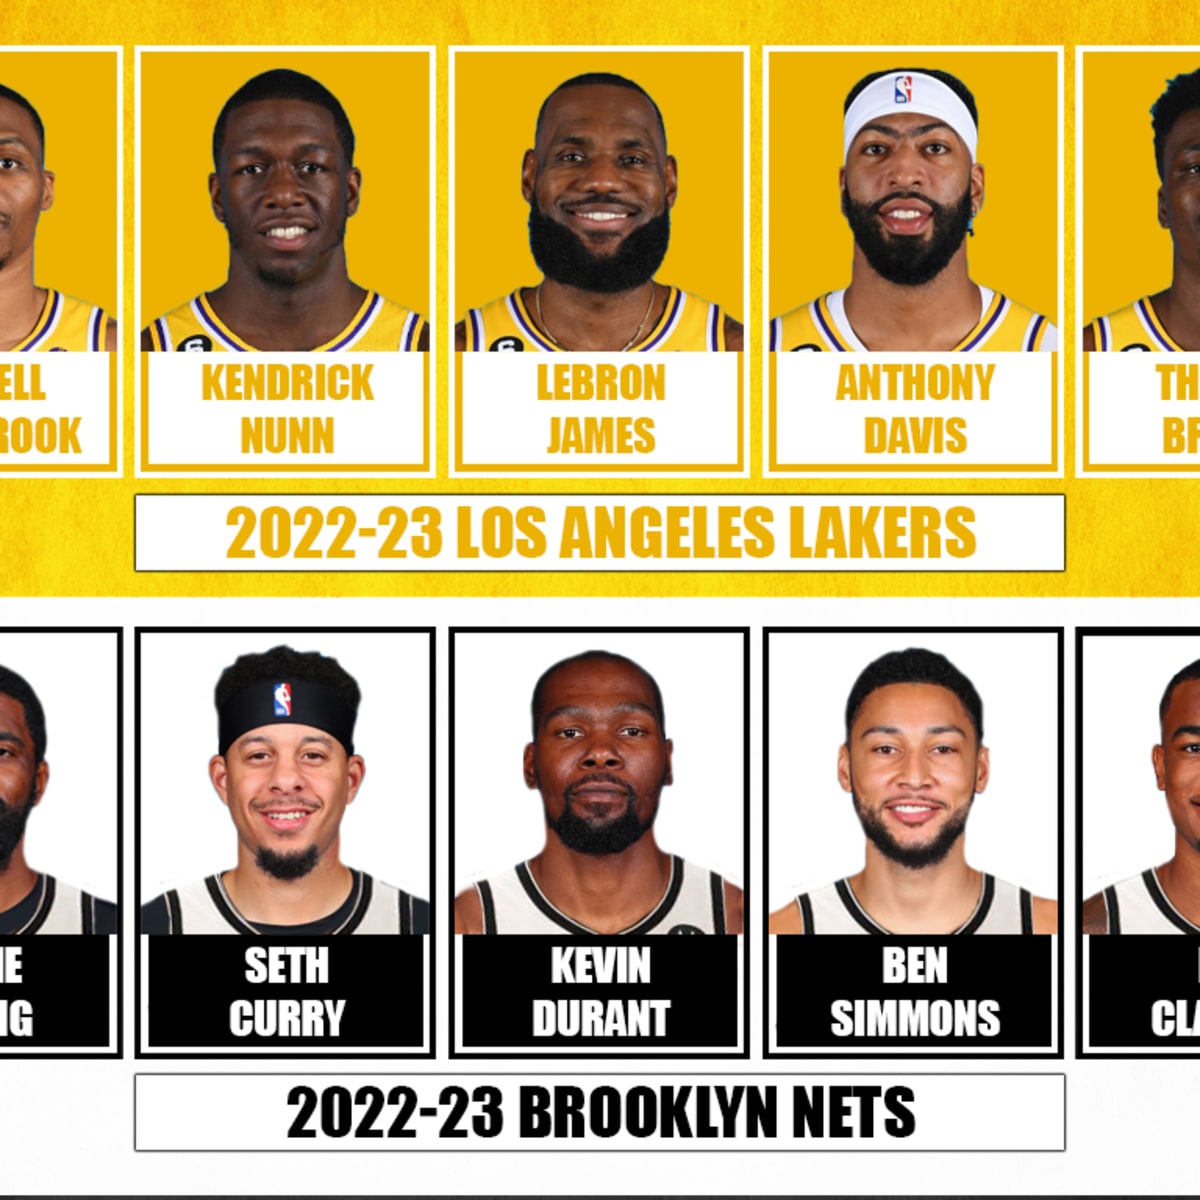 Brooklyn Nets on X: They're back. Introducing our 2022-23 City